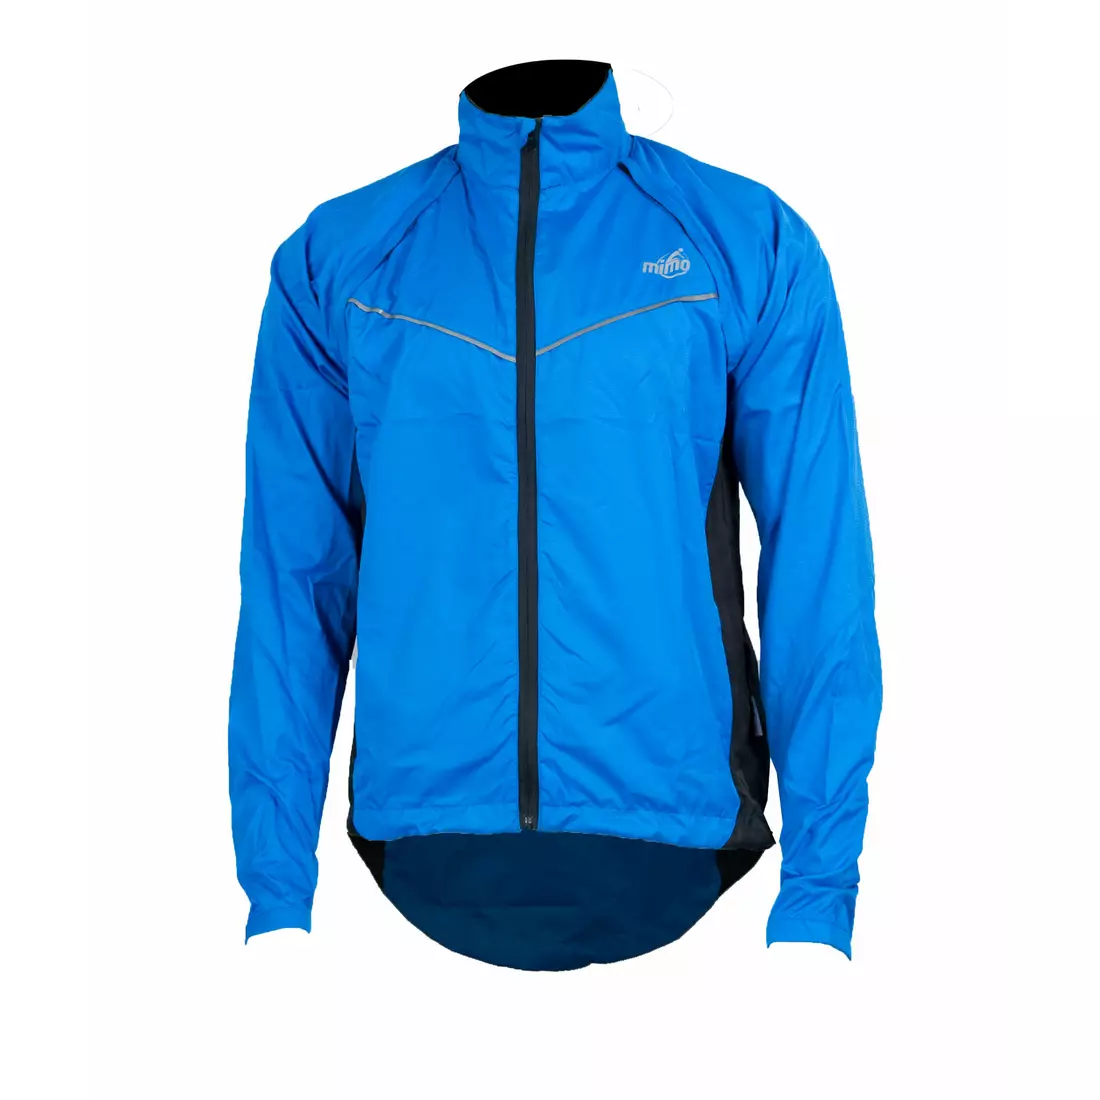 MikeSPORT SWORD - cycling jacket, detachable sleeves, color: Black and blue